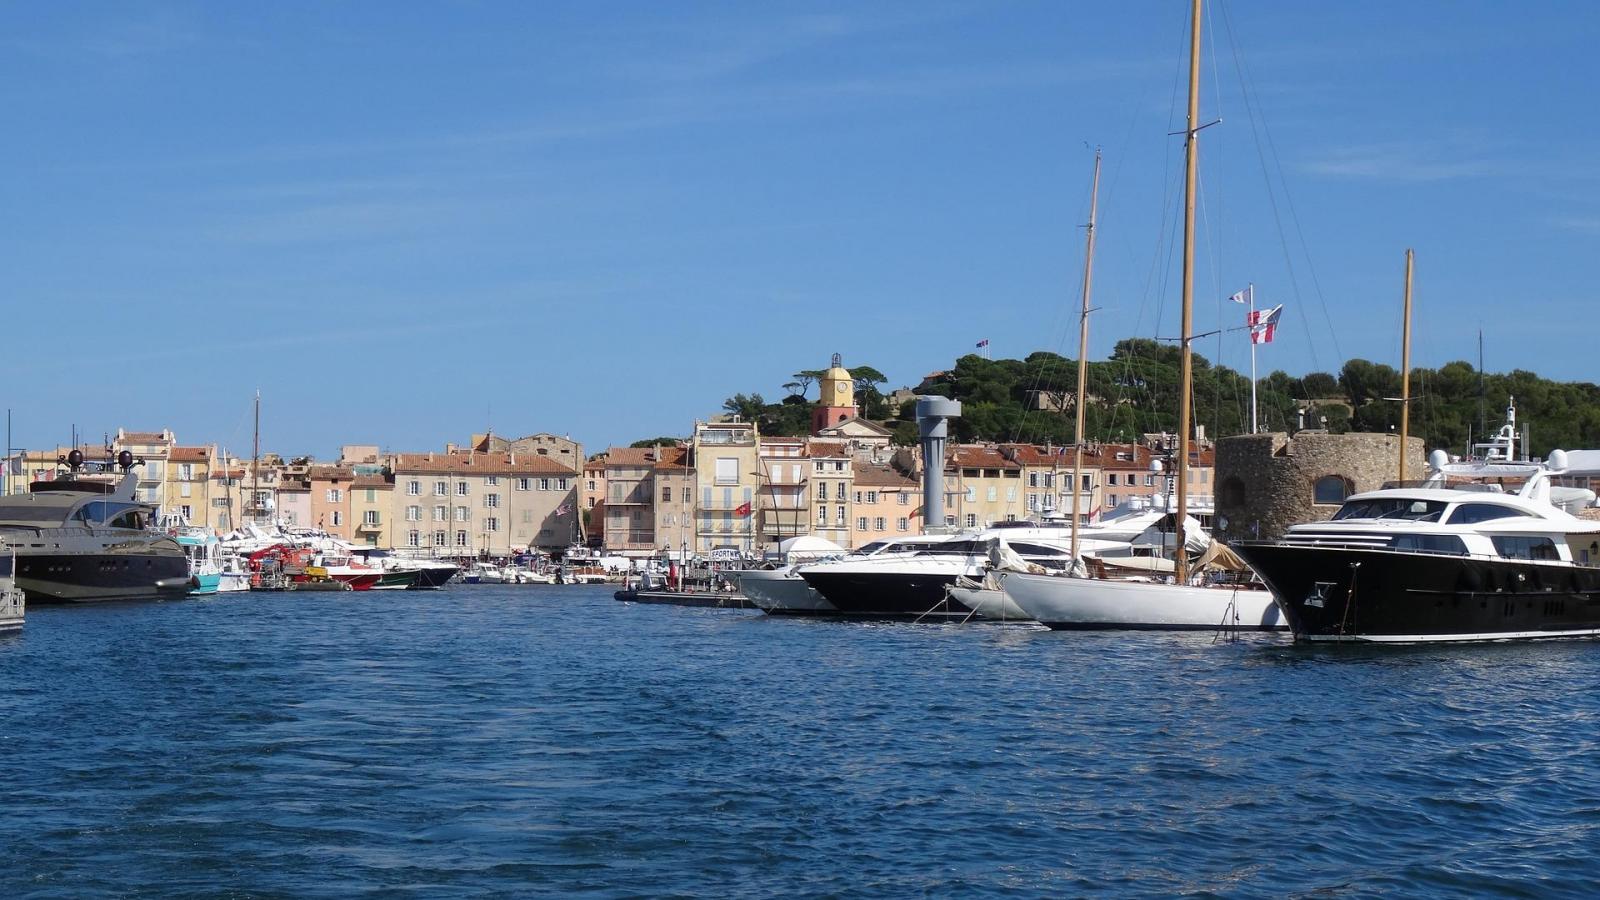 All about the sea in Saint-Tropez